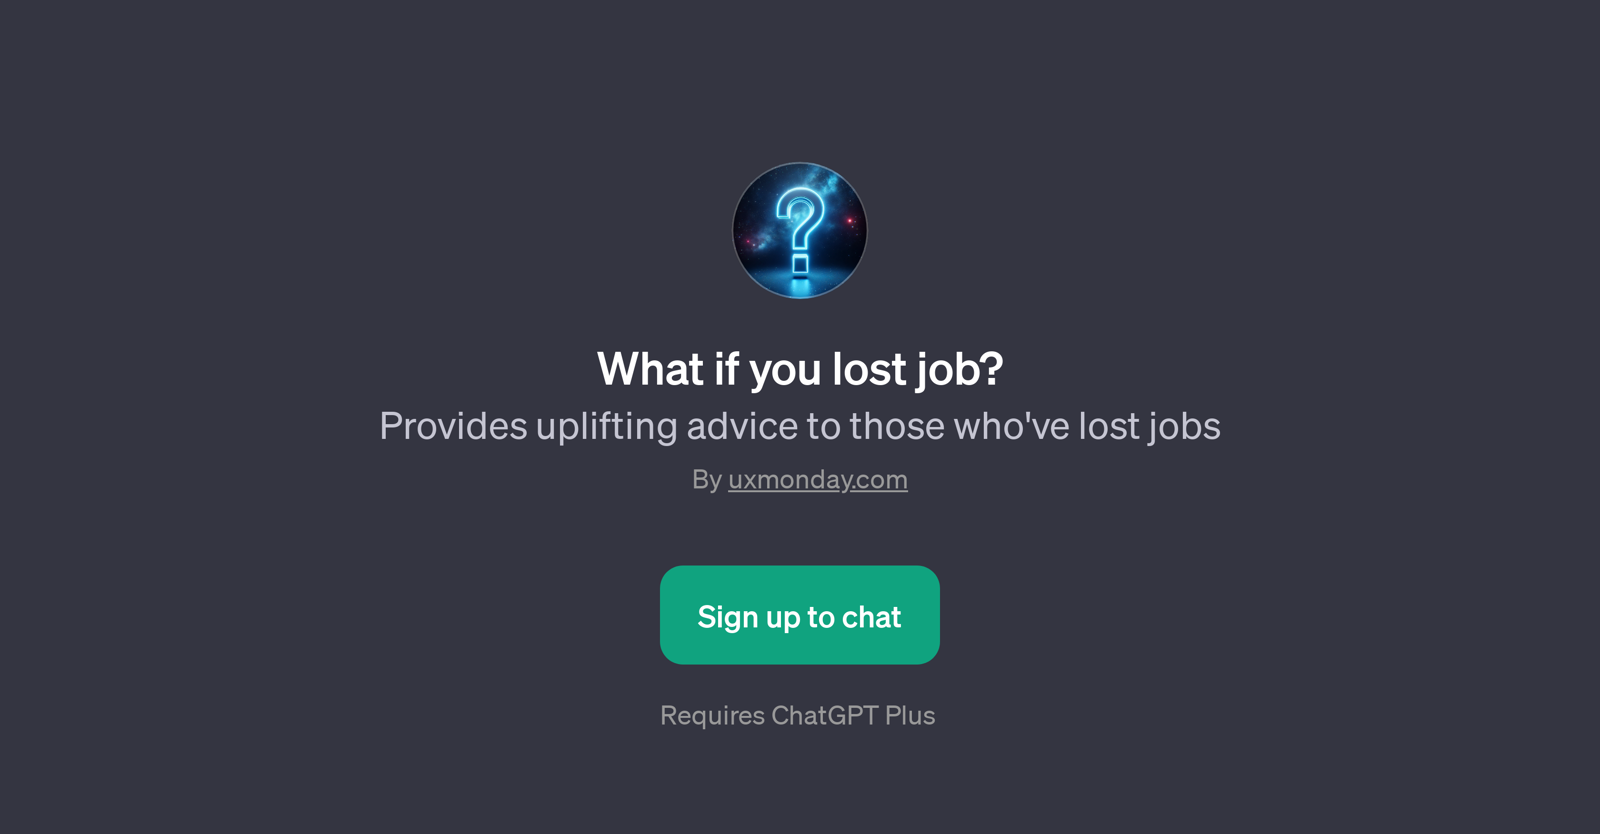 What if you lost job? website